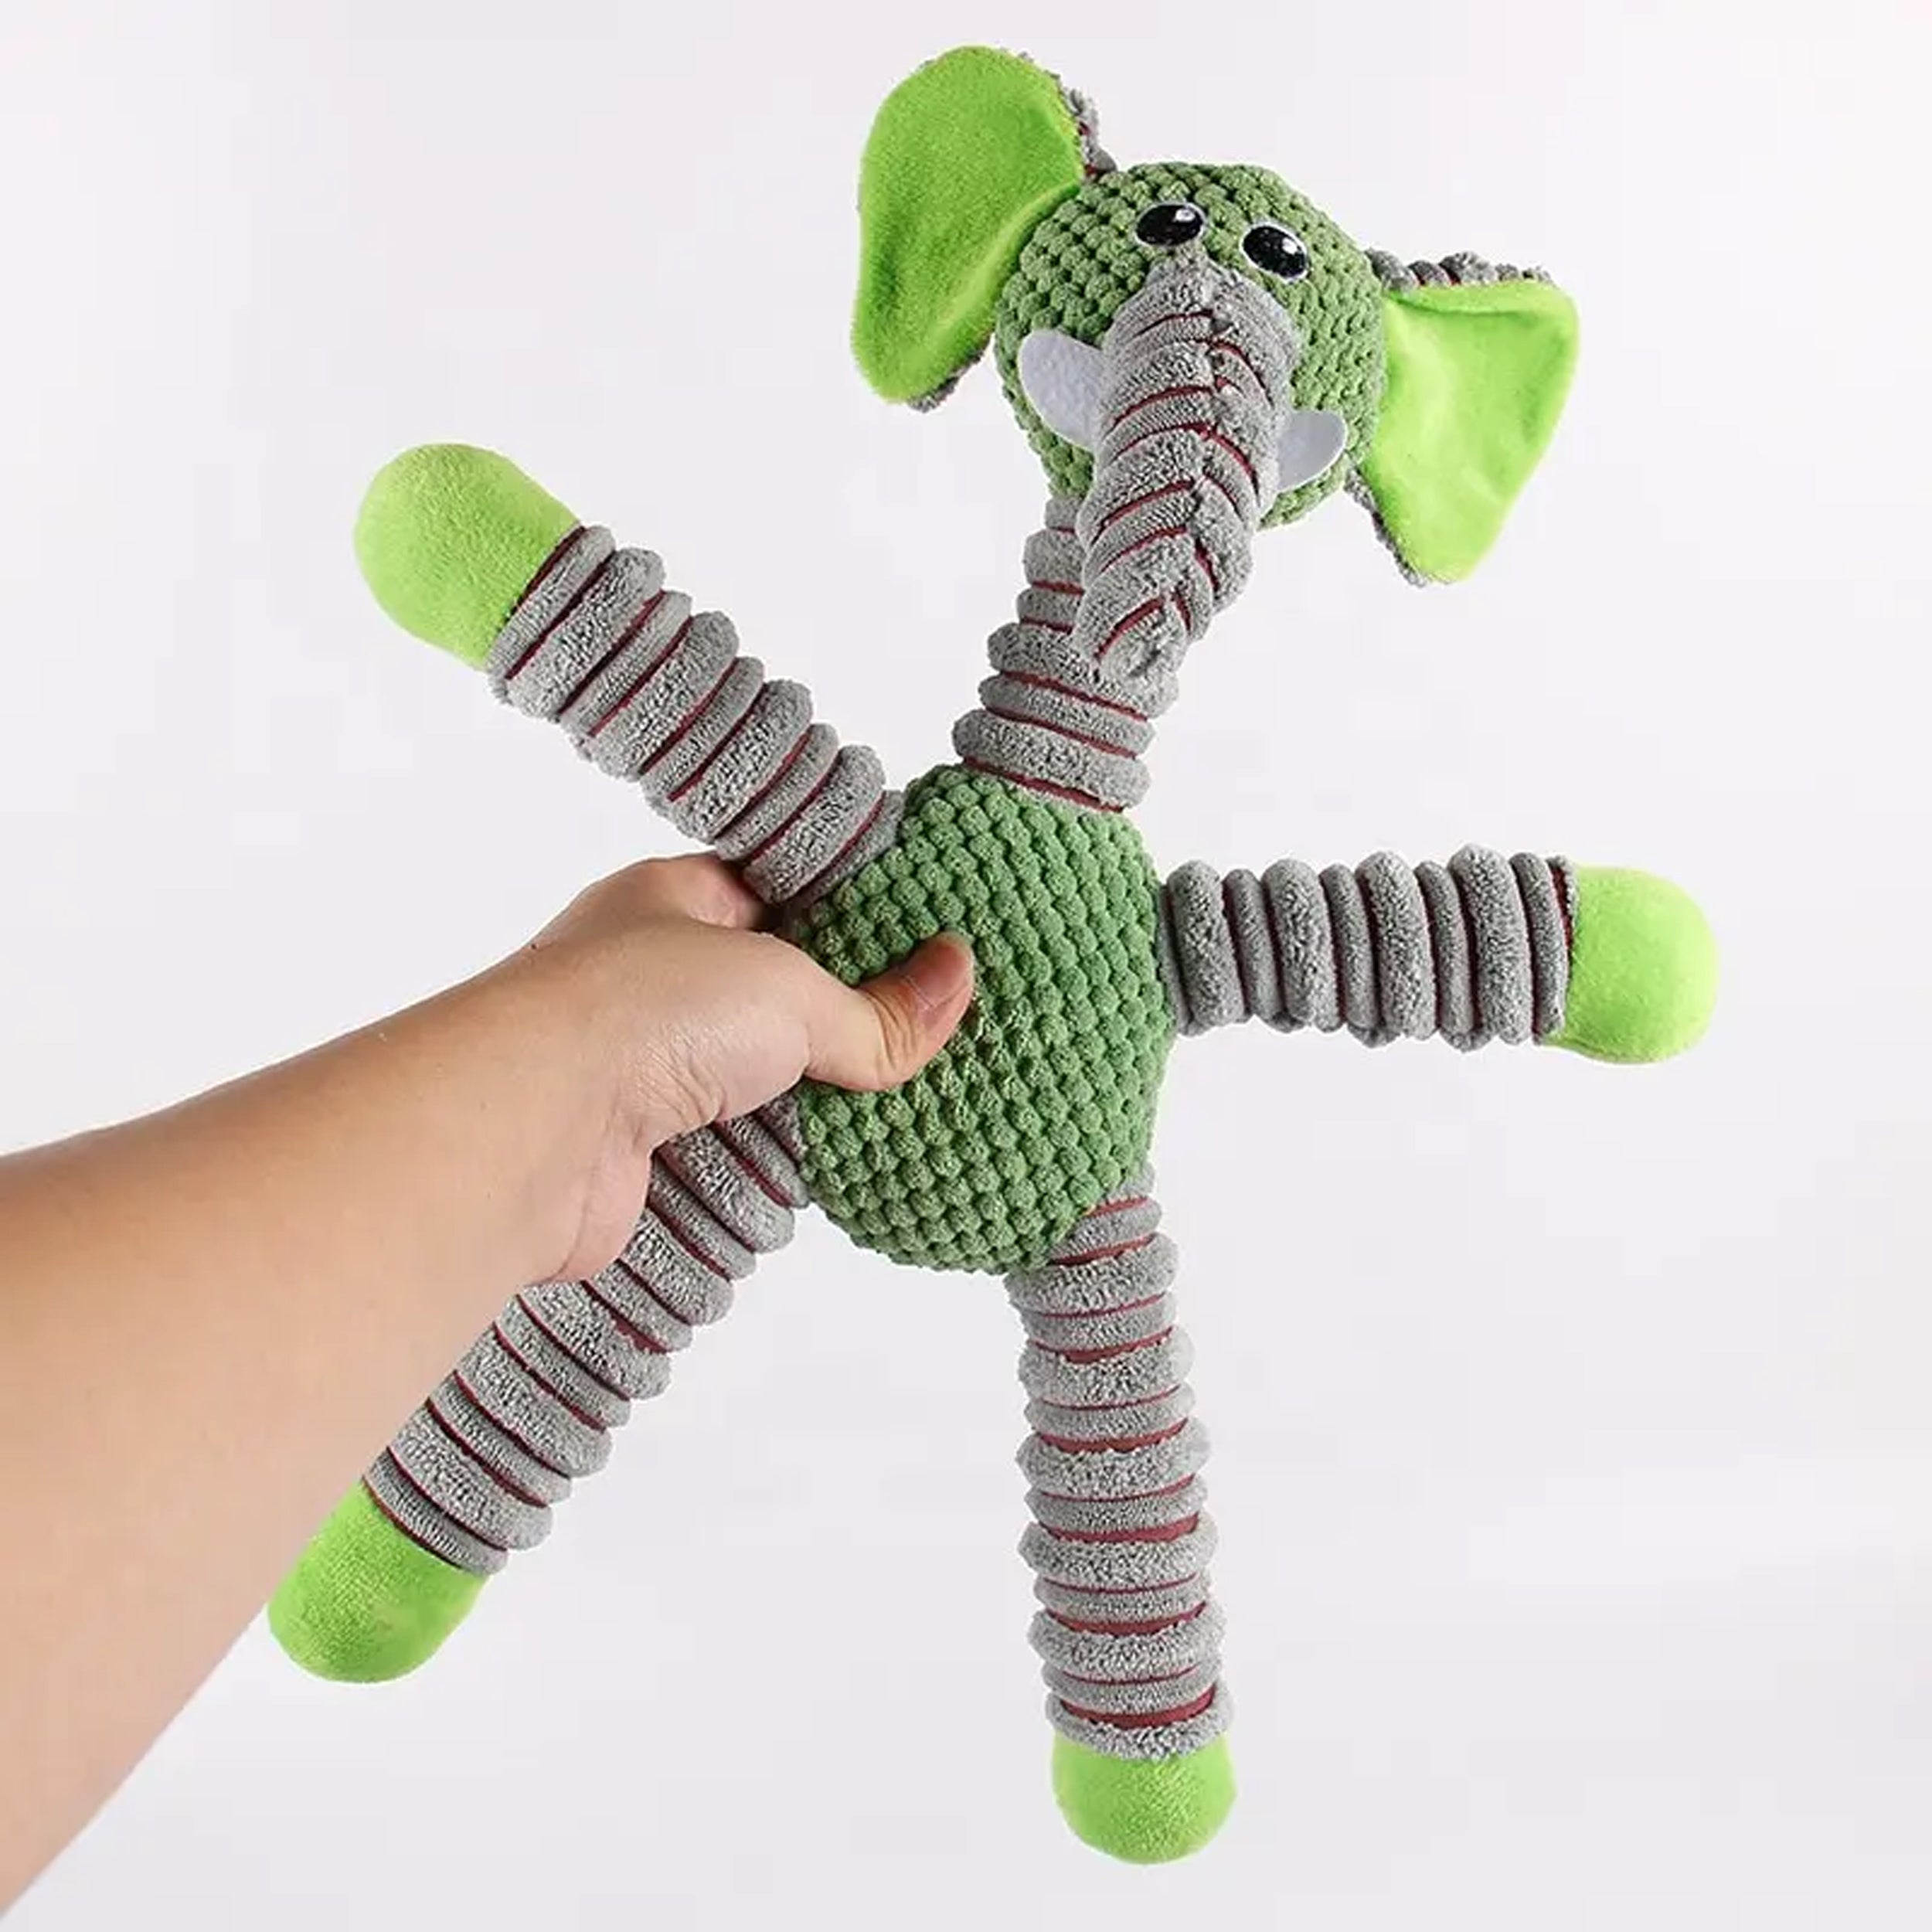 Engage Your Pet with Plush Stuffed Animal Interactive Pet Toys